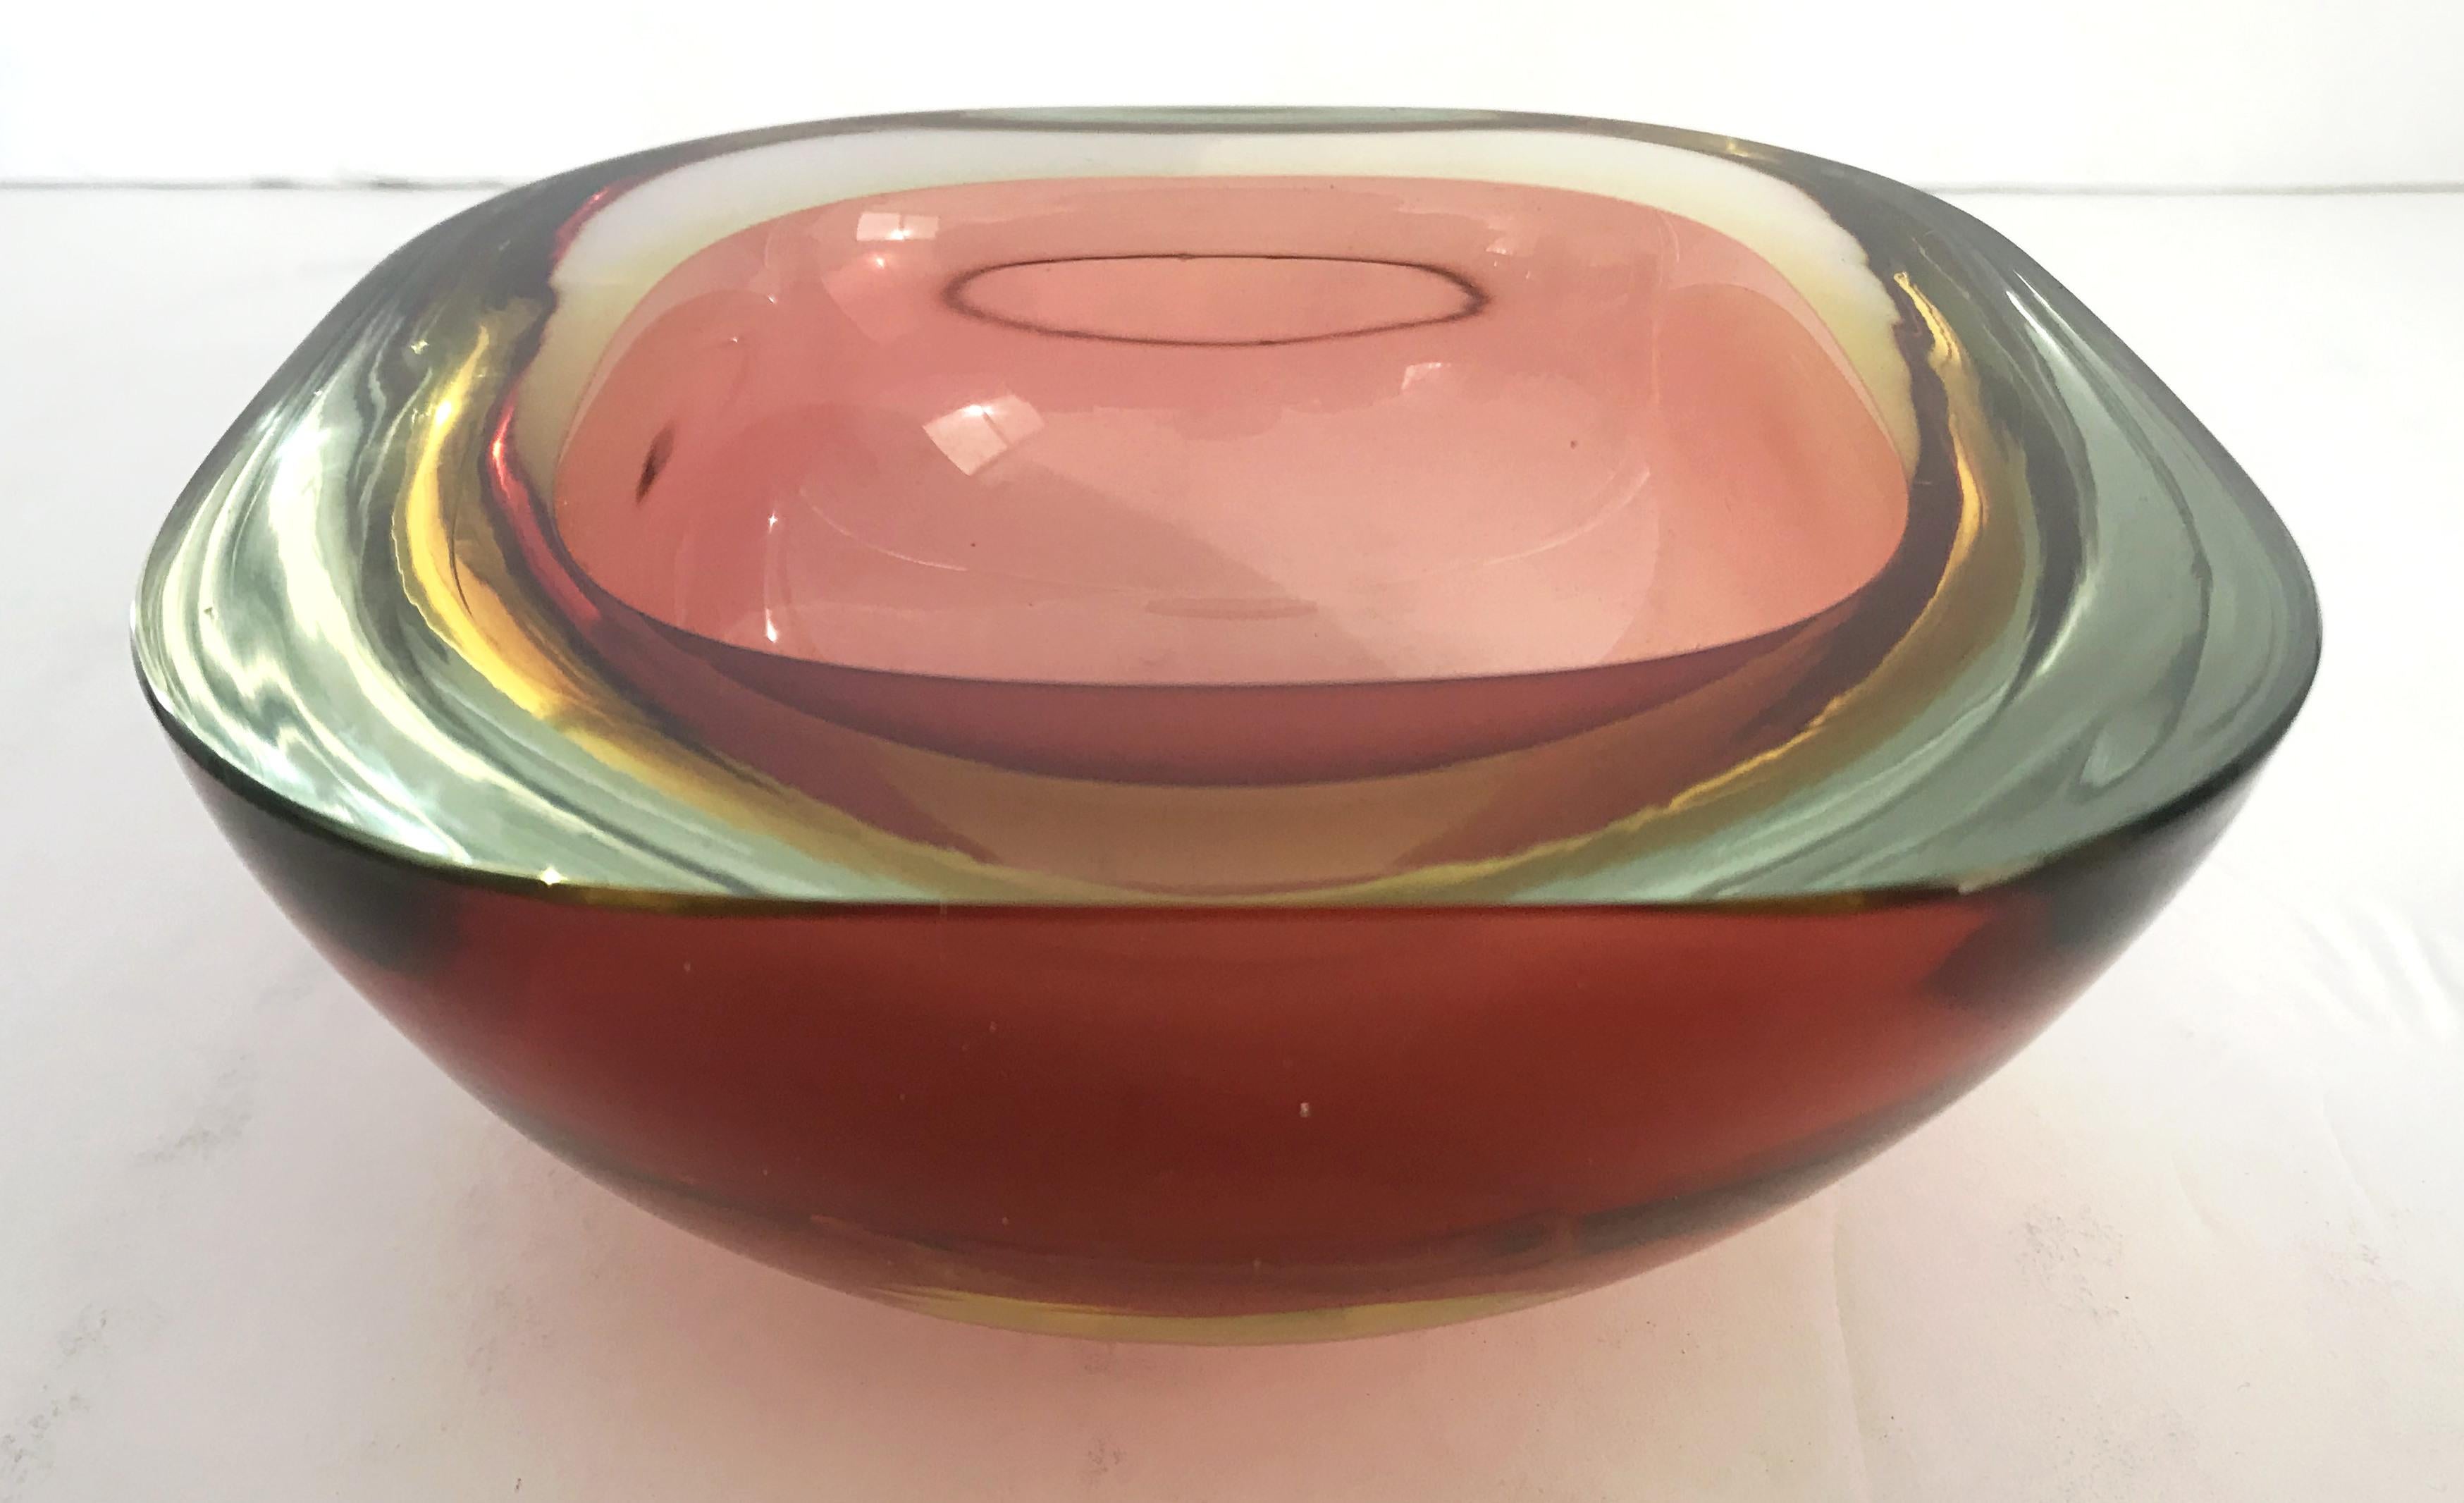 Vintage Italian amber Murano glass bowl blown in Sommerso technique / Made in Italy, circa 1960s
Measures: width 6 inches, depth 6 inches, height 2.5 inches
1 in stock in Los Angeles
Order Reference #: FABIOLTD G180
This piece makes for great and